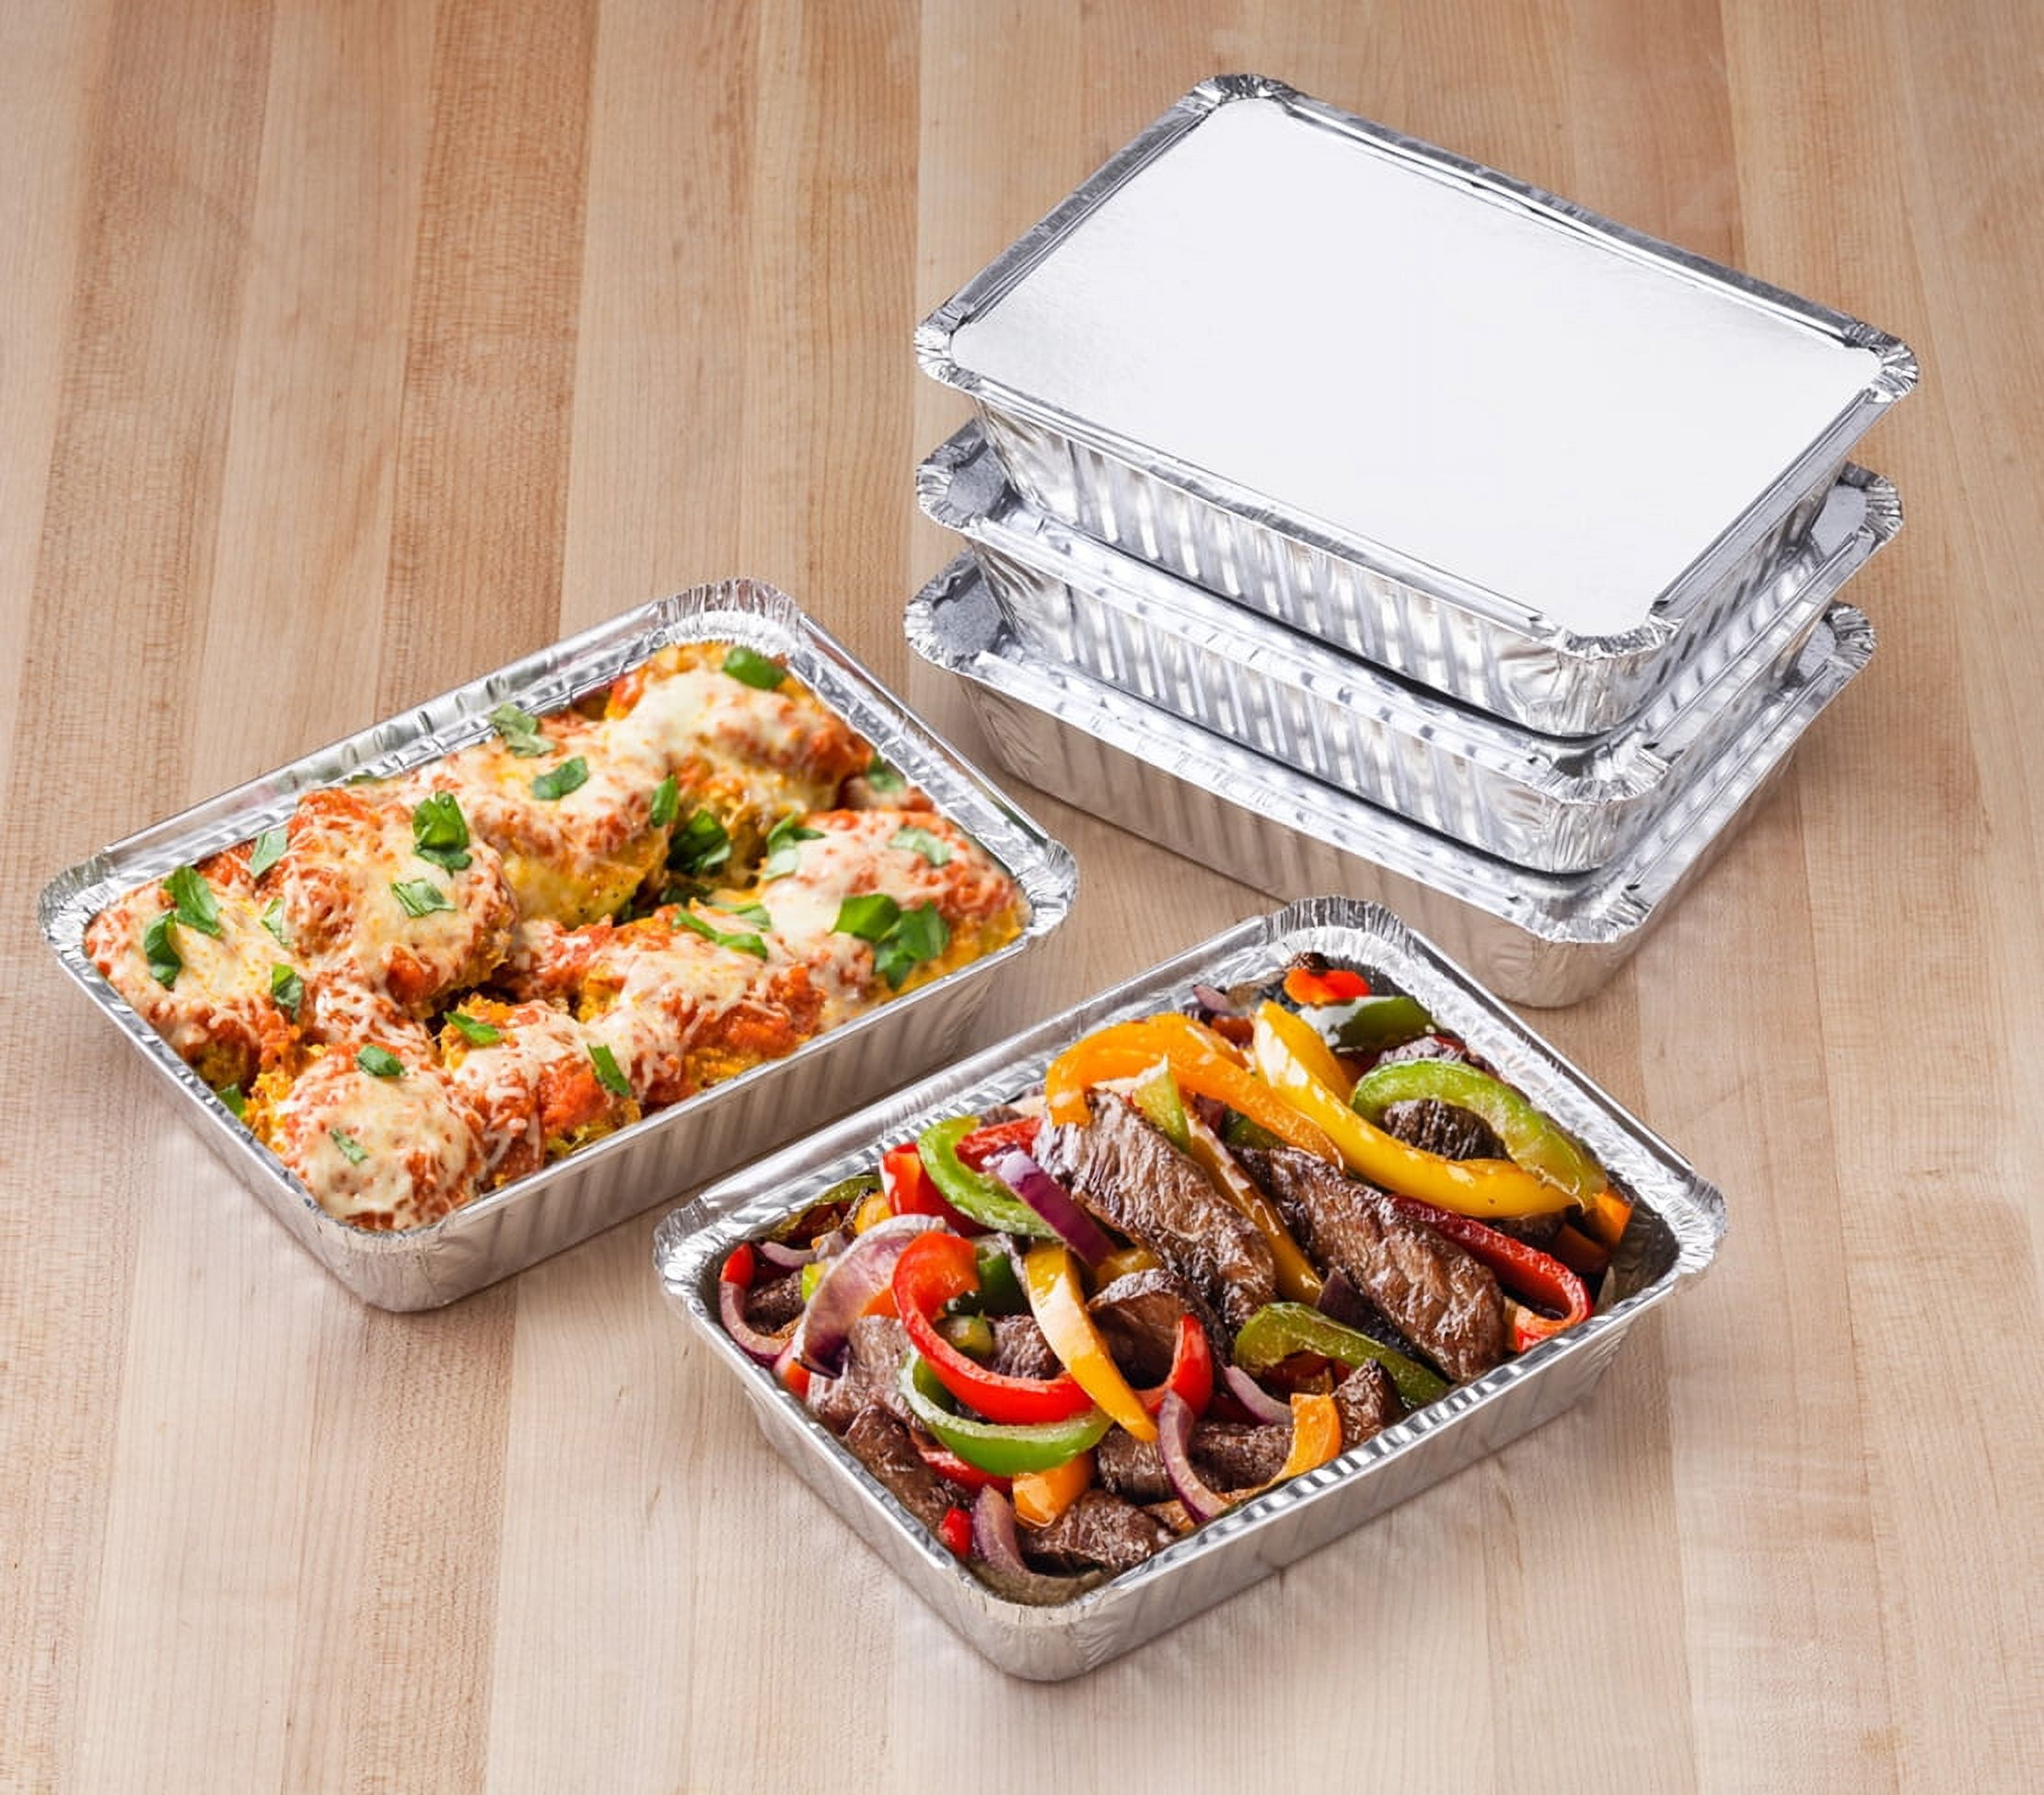 Handi-Foil Storage Containers with Board Lids, Deep, 3 Pack - 3 pans